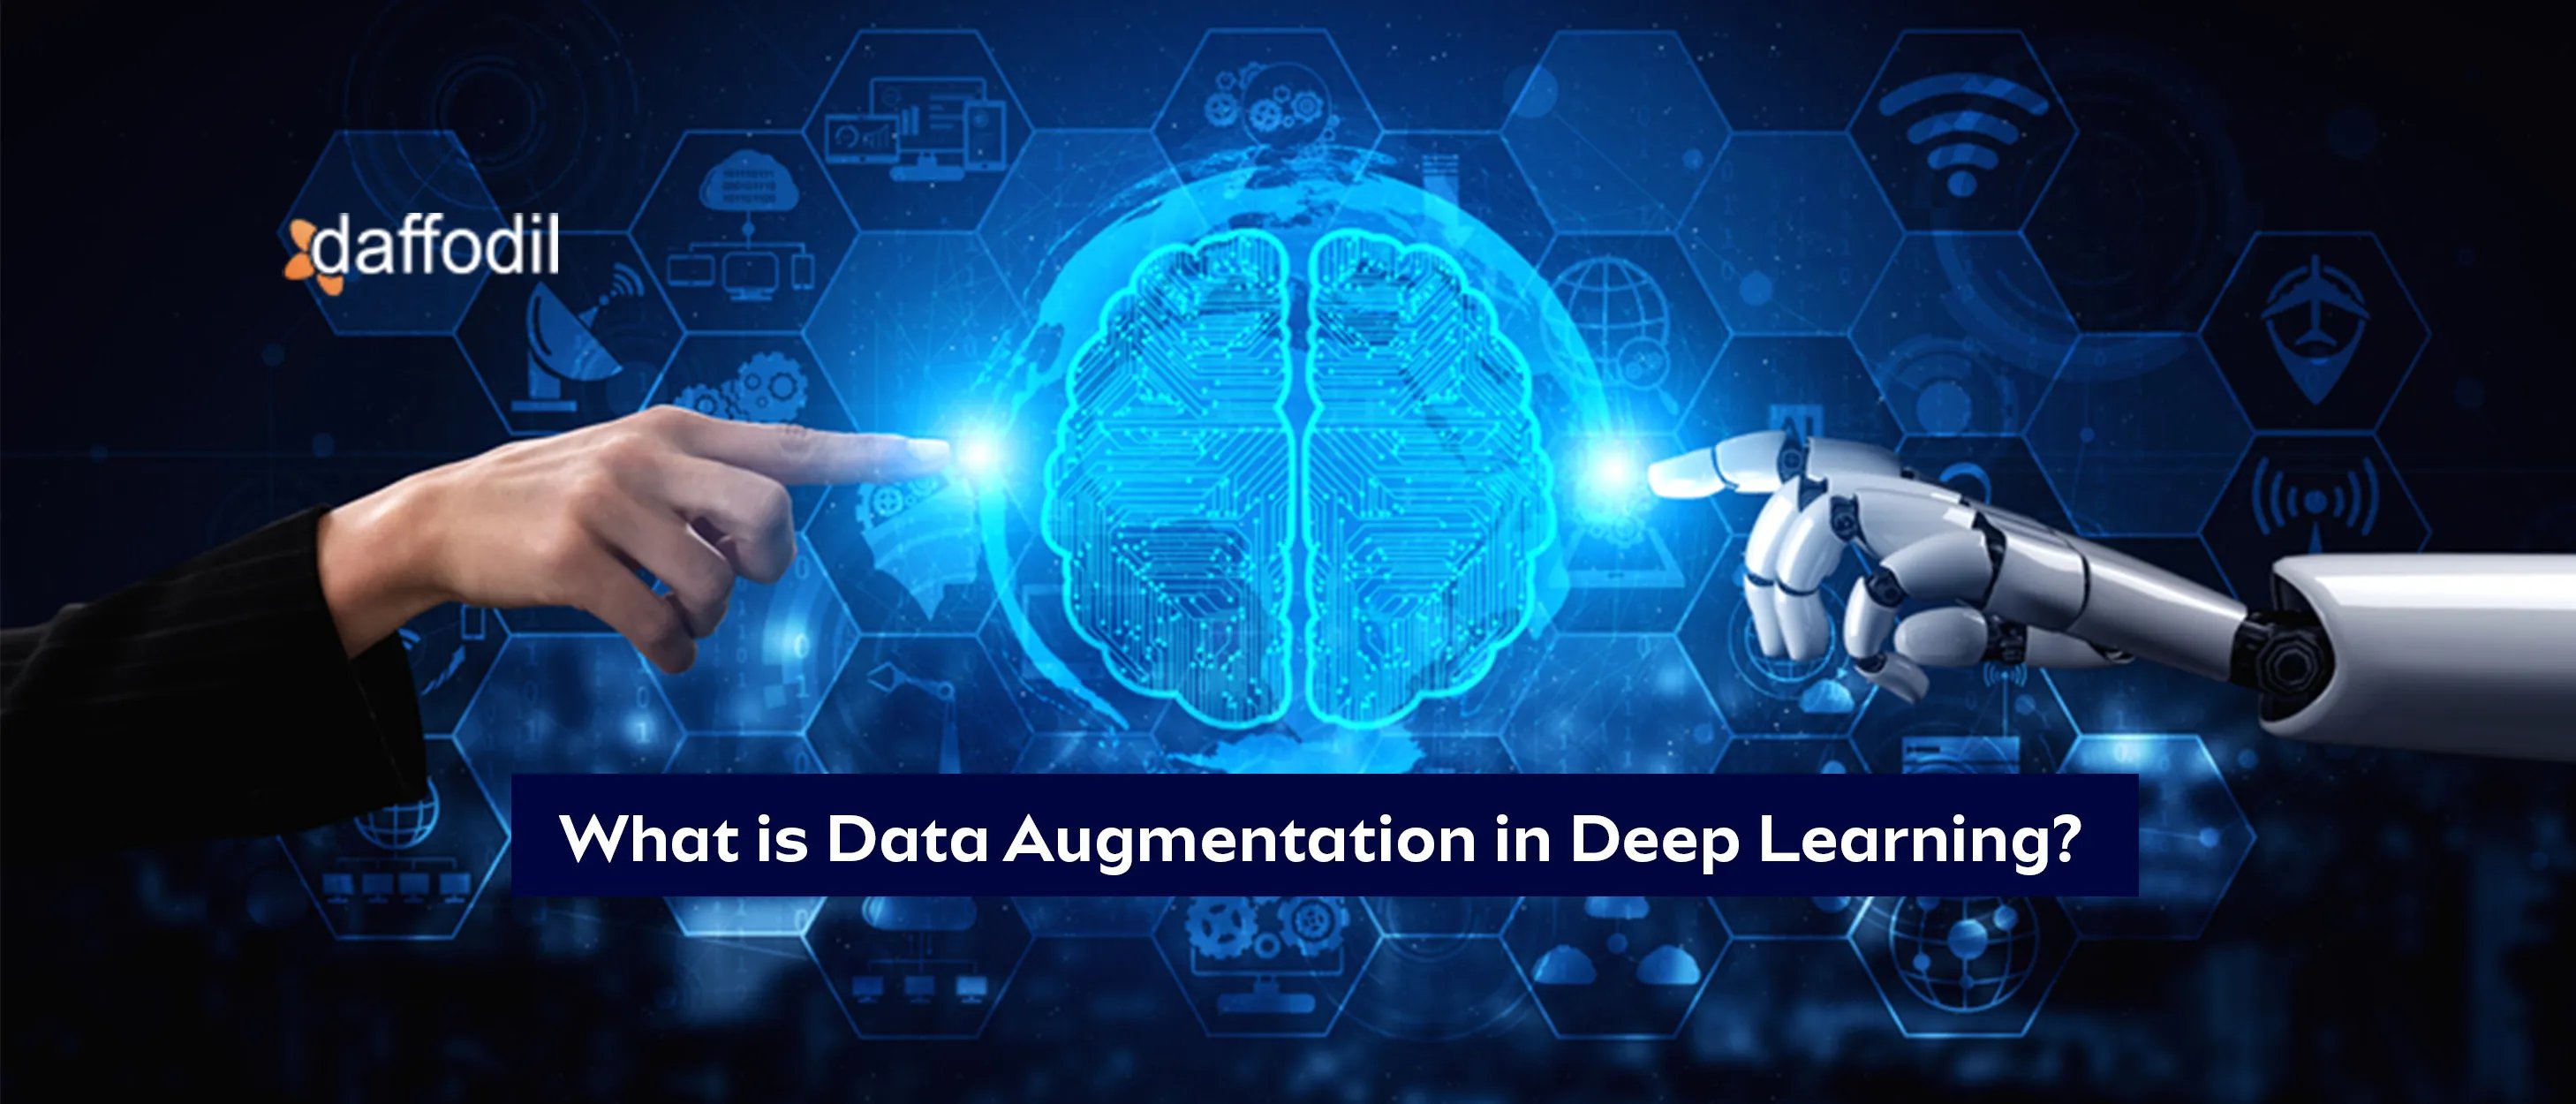 What is Data Augmentation in Deep Learning